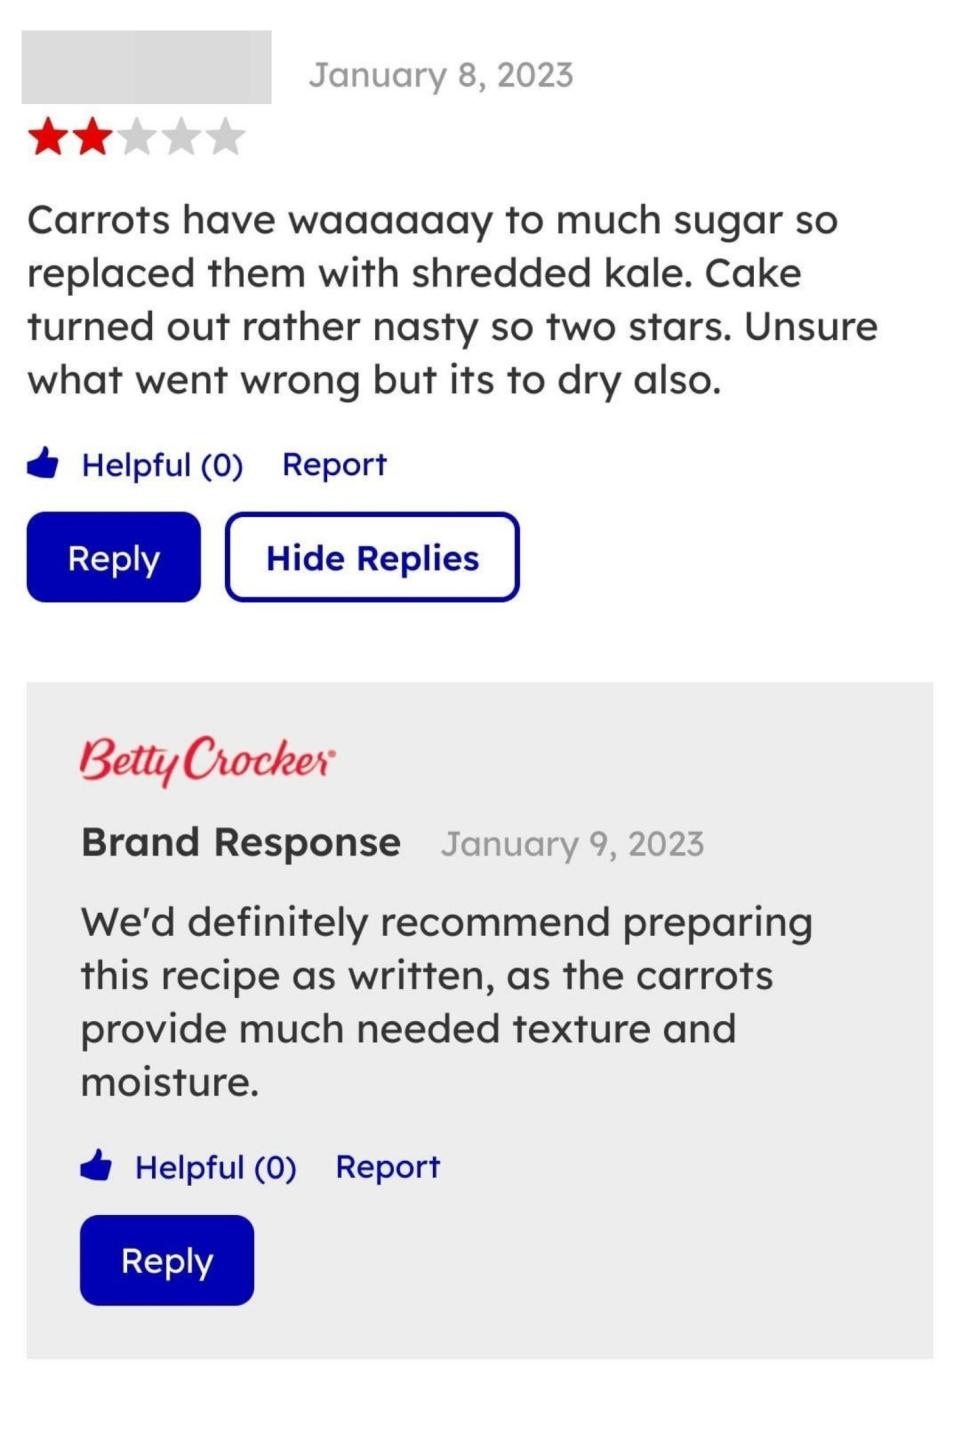 "We'd definitely recommend preparing this recipe as written..."